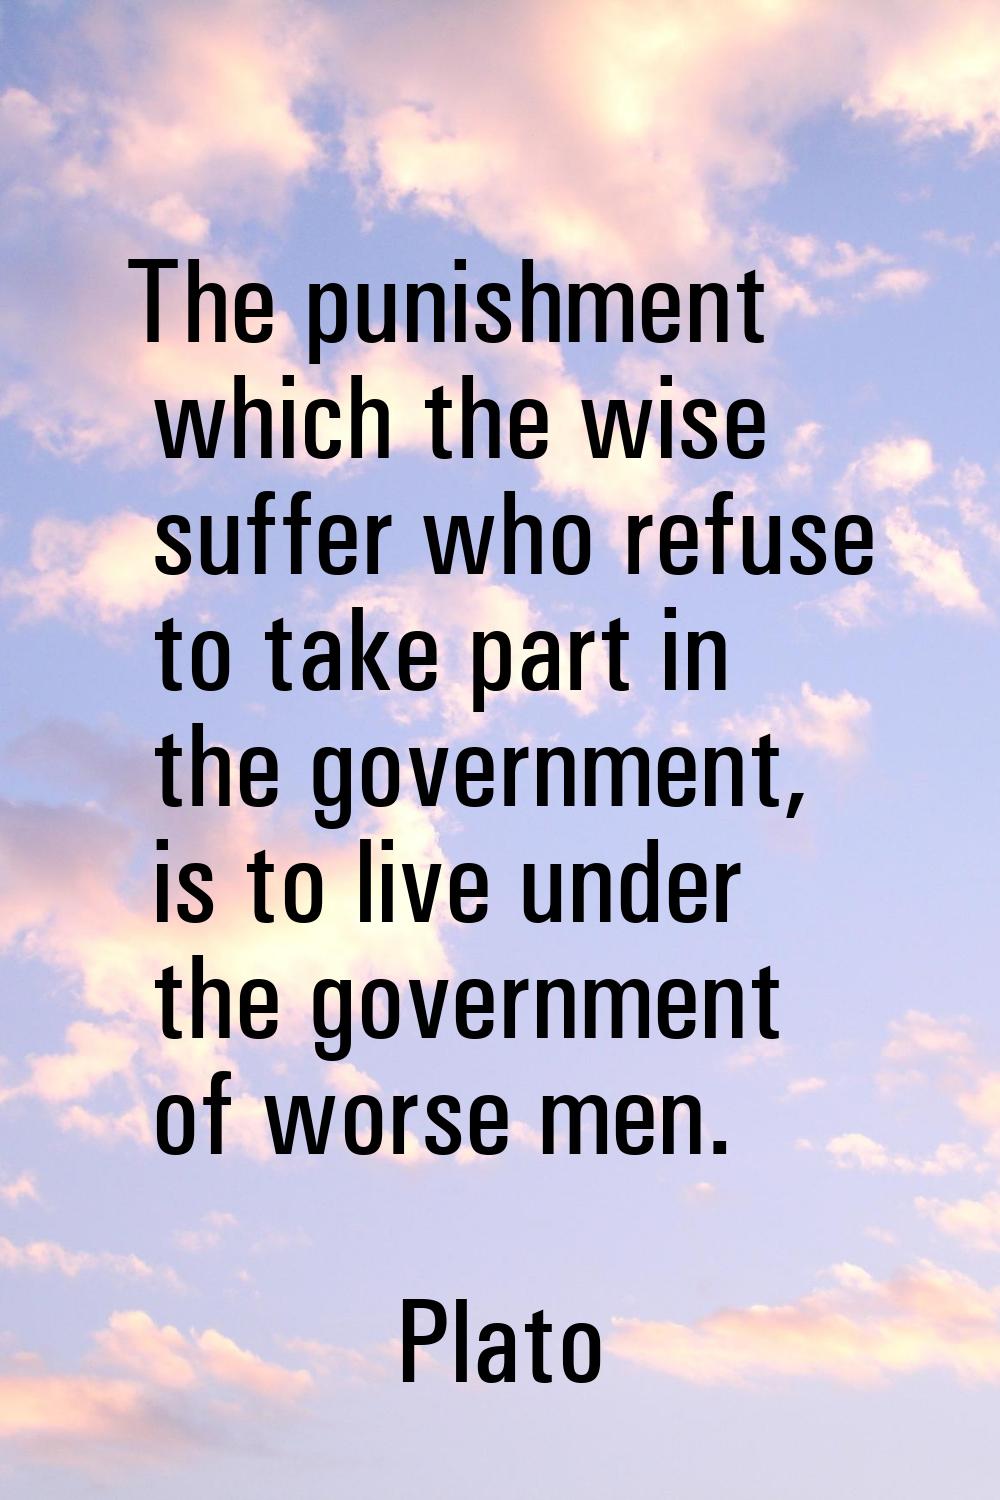 The punishment which the wise suffer who refuse to take part in the government, is to live under th